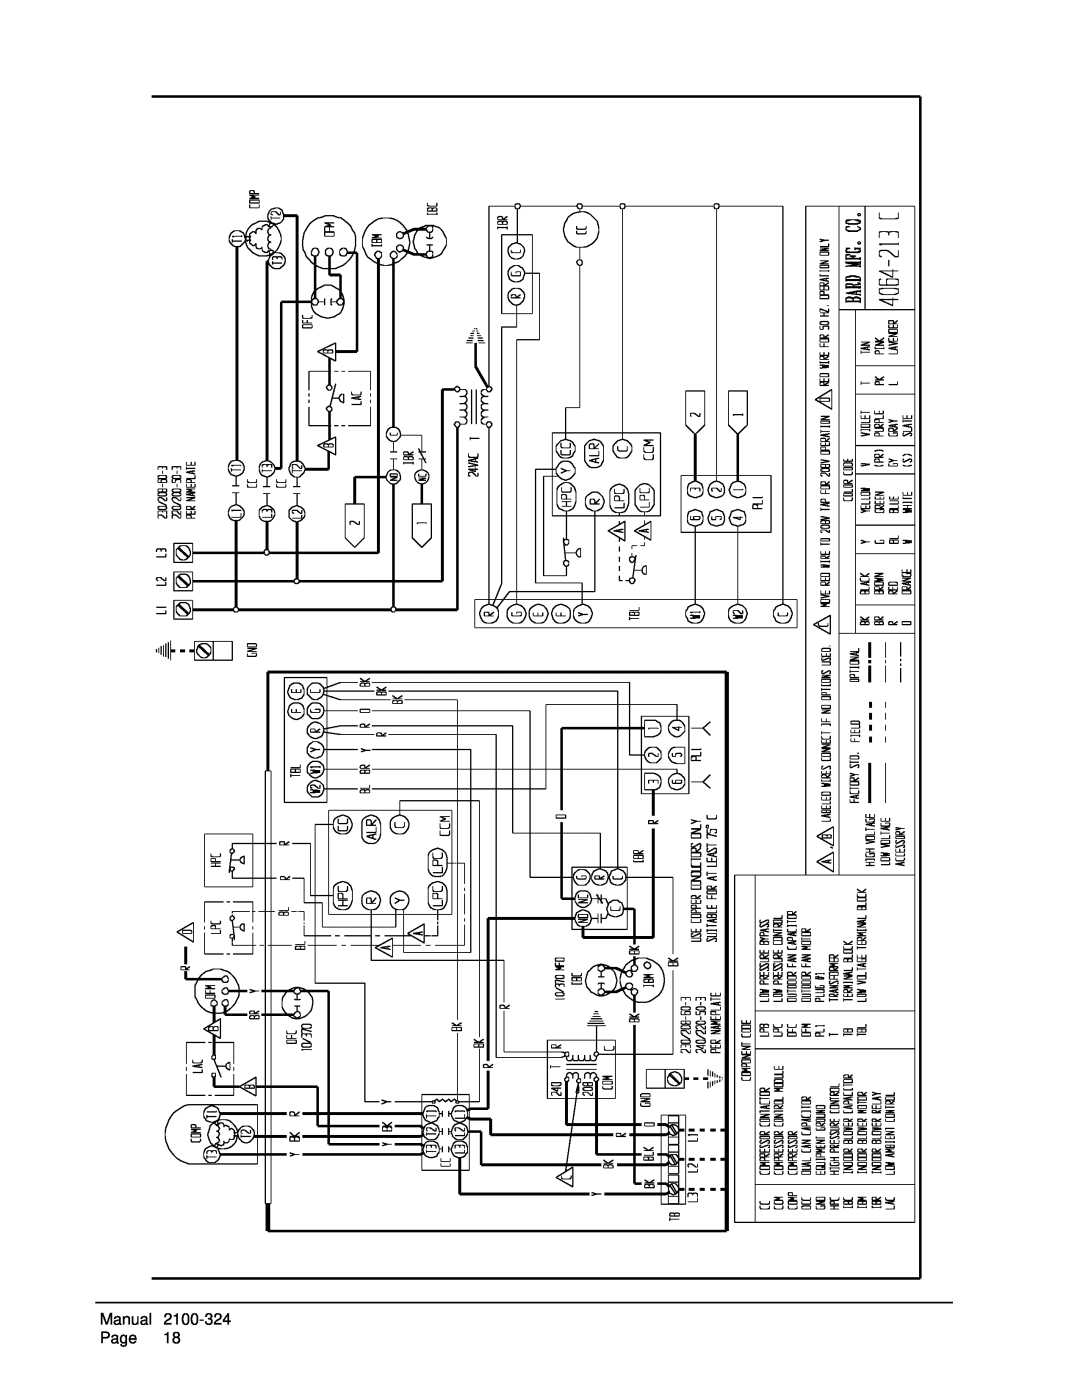 Bard P1060A1, P1148A1, P1142A3 installation instructions Manual, Page 